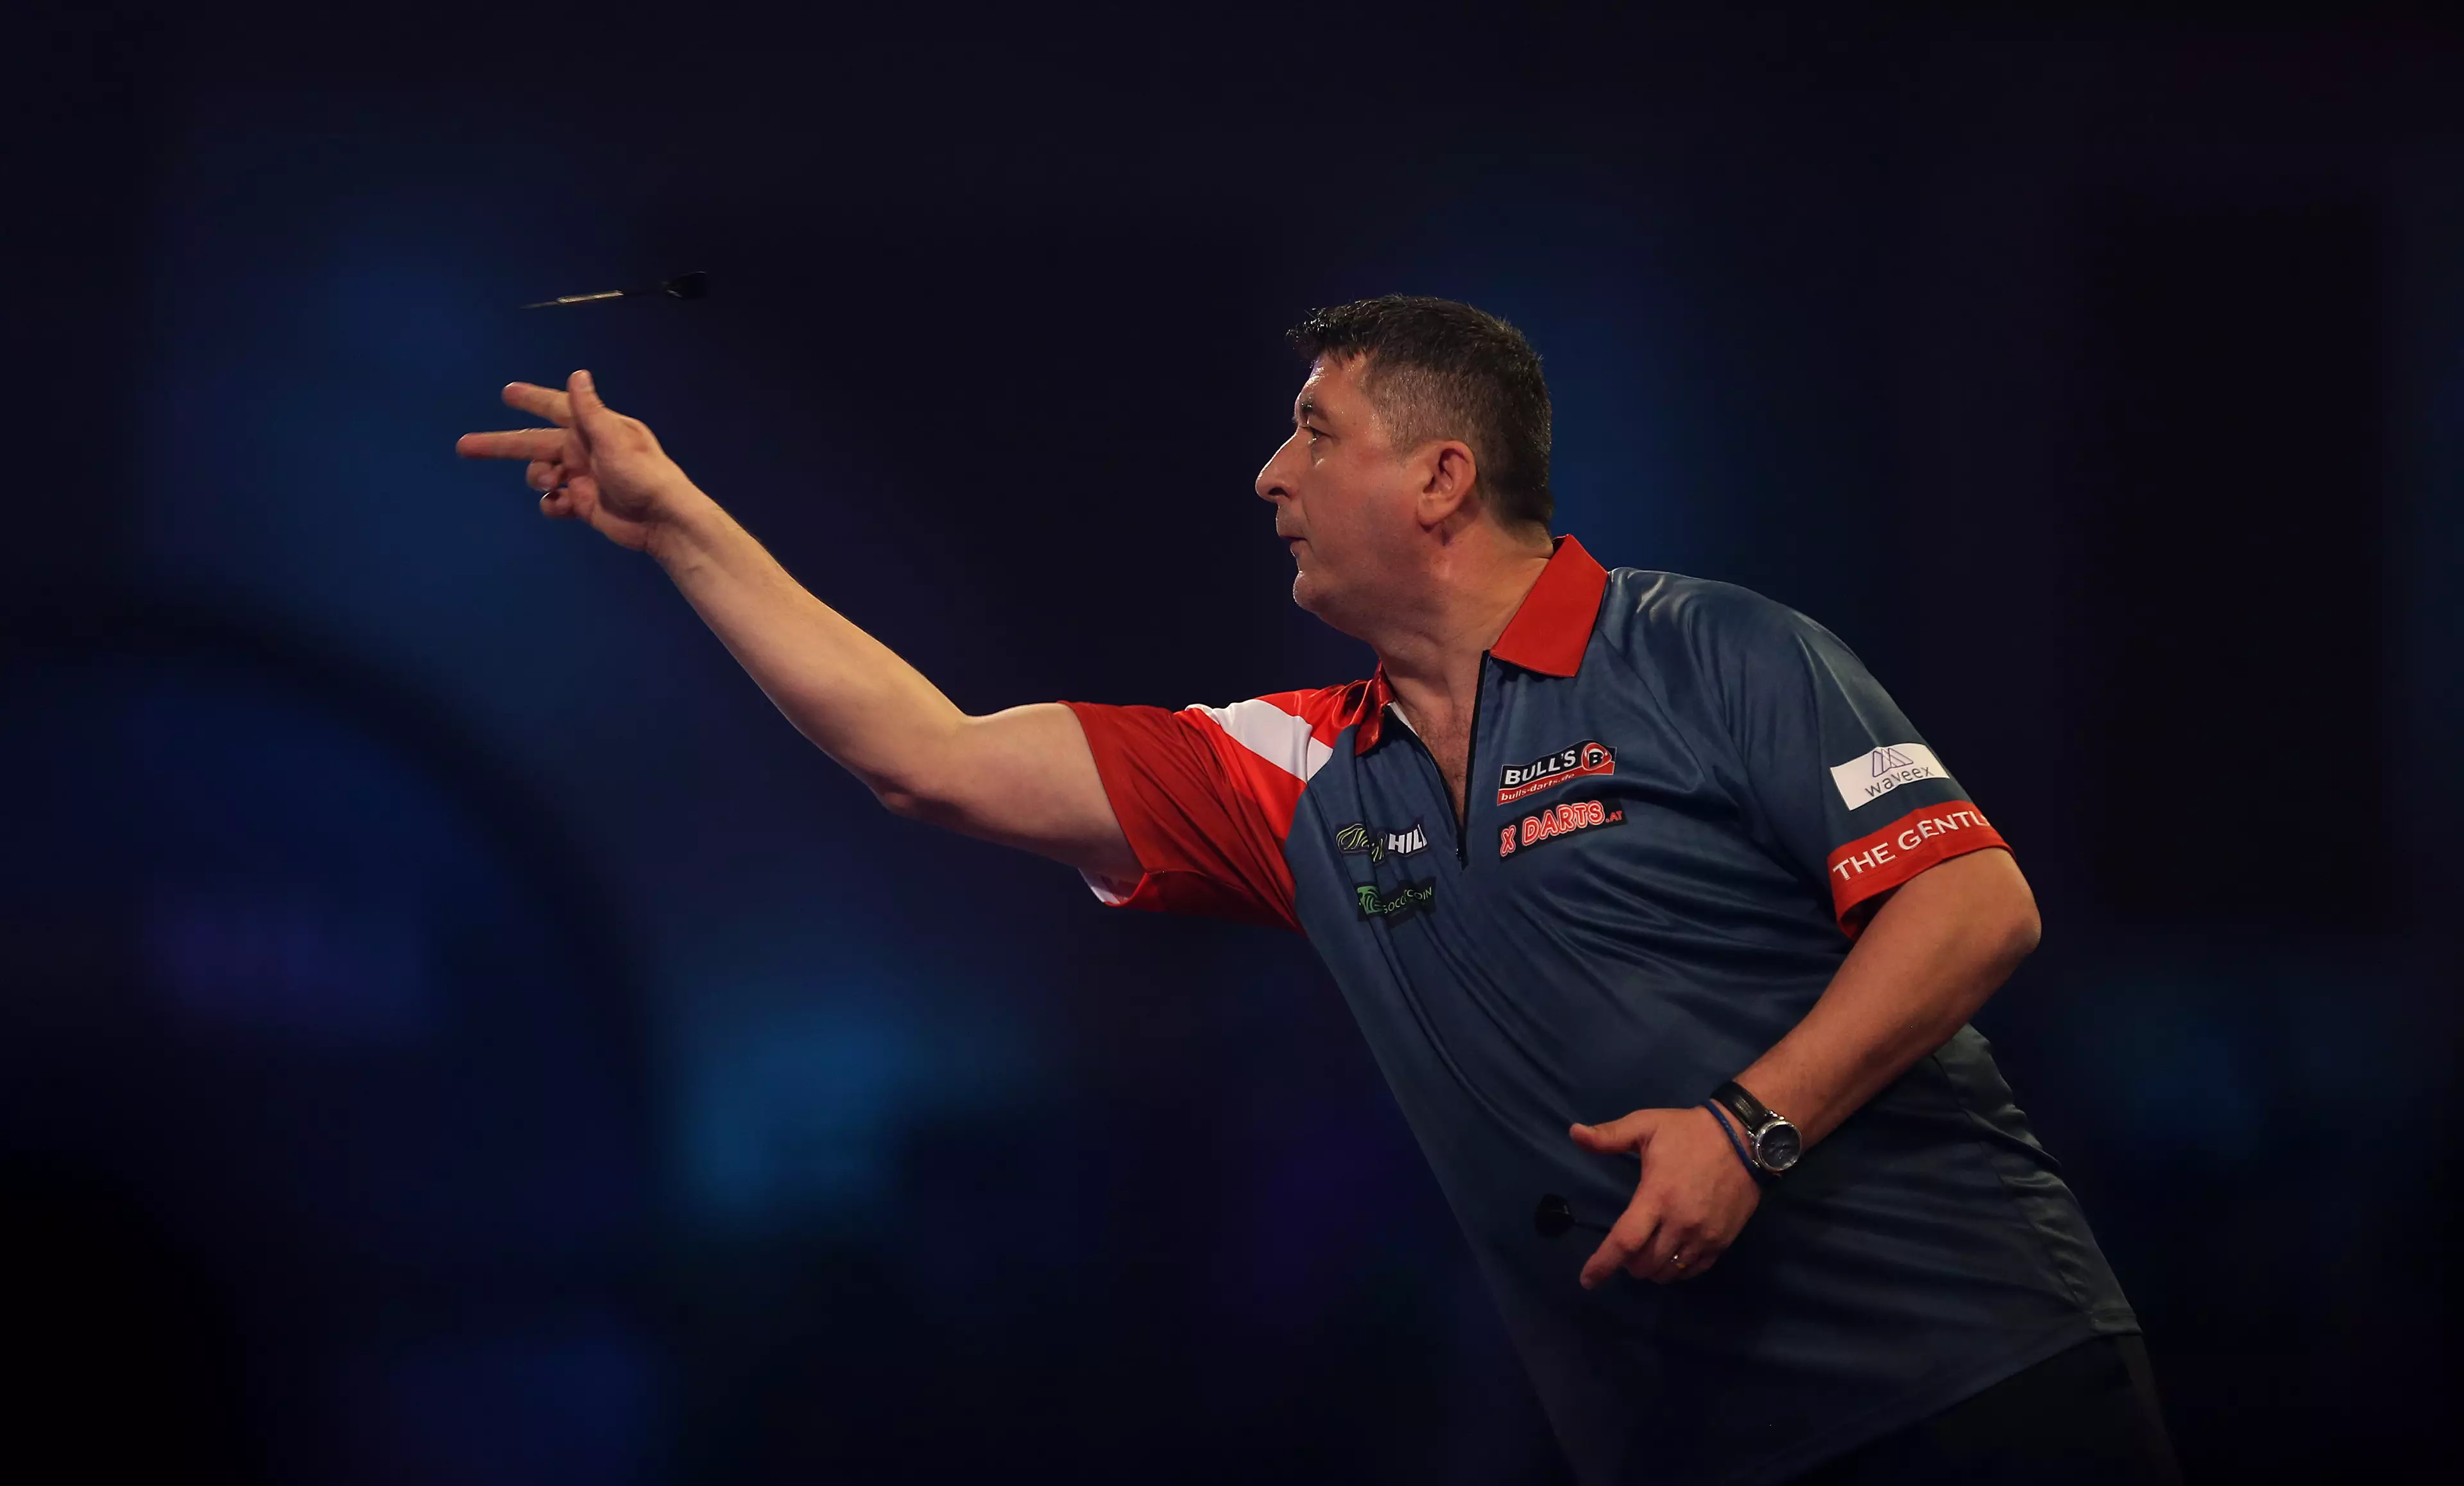 Sherrock beat Mensur Suljovic, who is ranked 11th in the world.